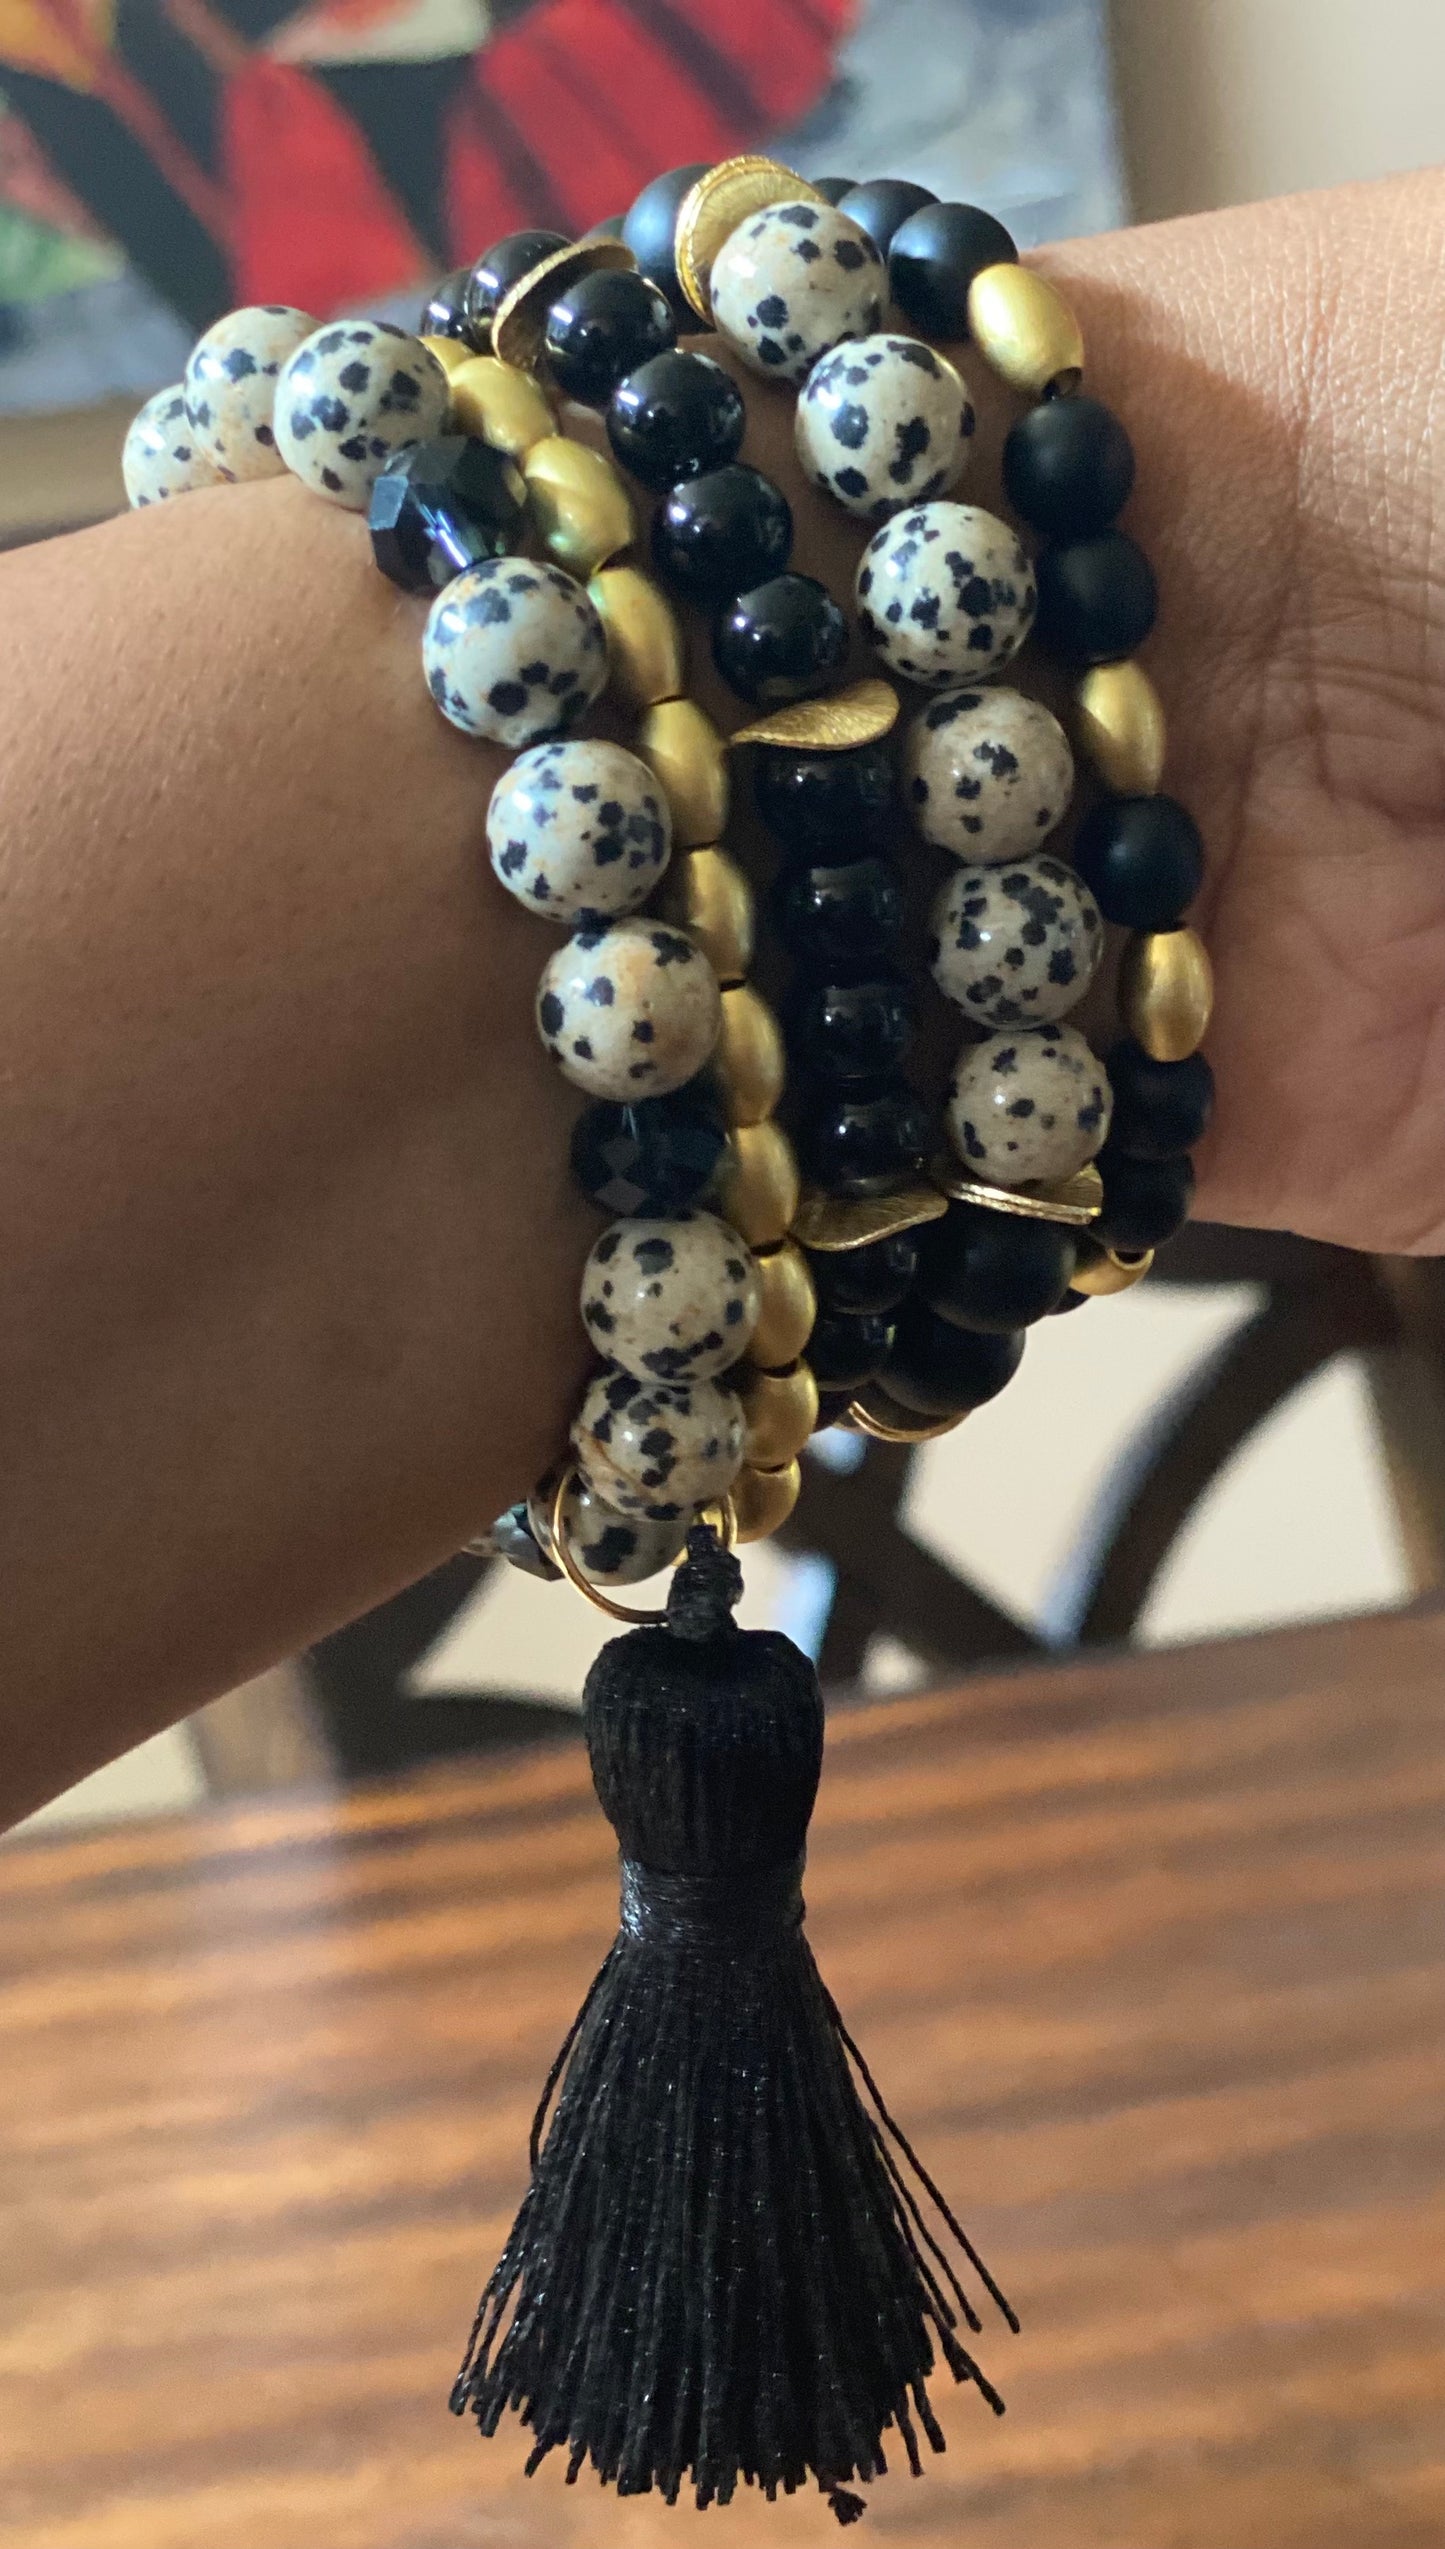 5 stretch bracelets with round Dalmatian jasper beads, gold barrel beads and round onyx beads with black knit tassel, shown on outstretched arm to show details of bracelet stack 